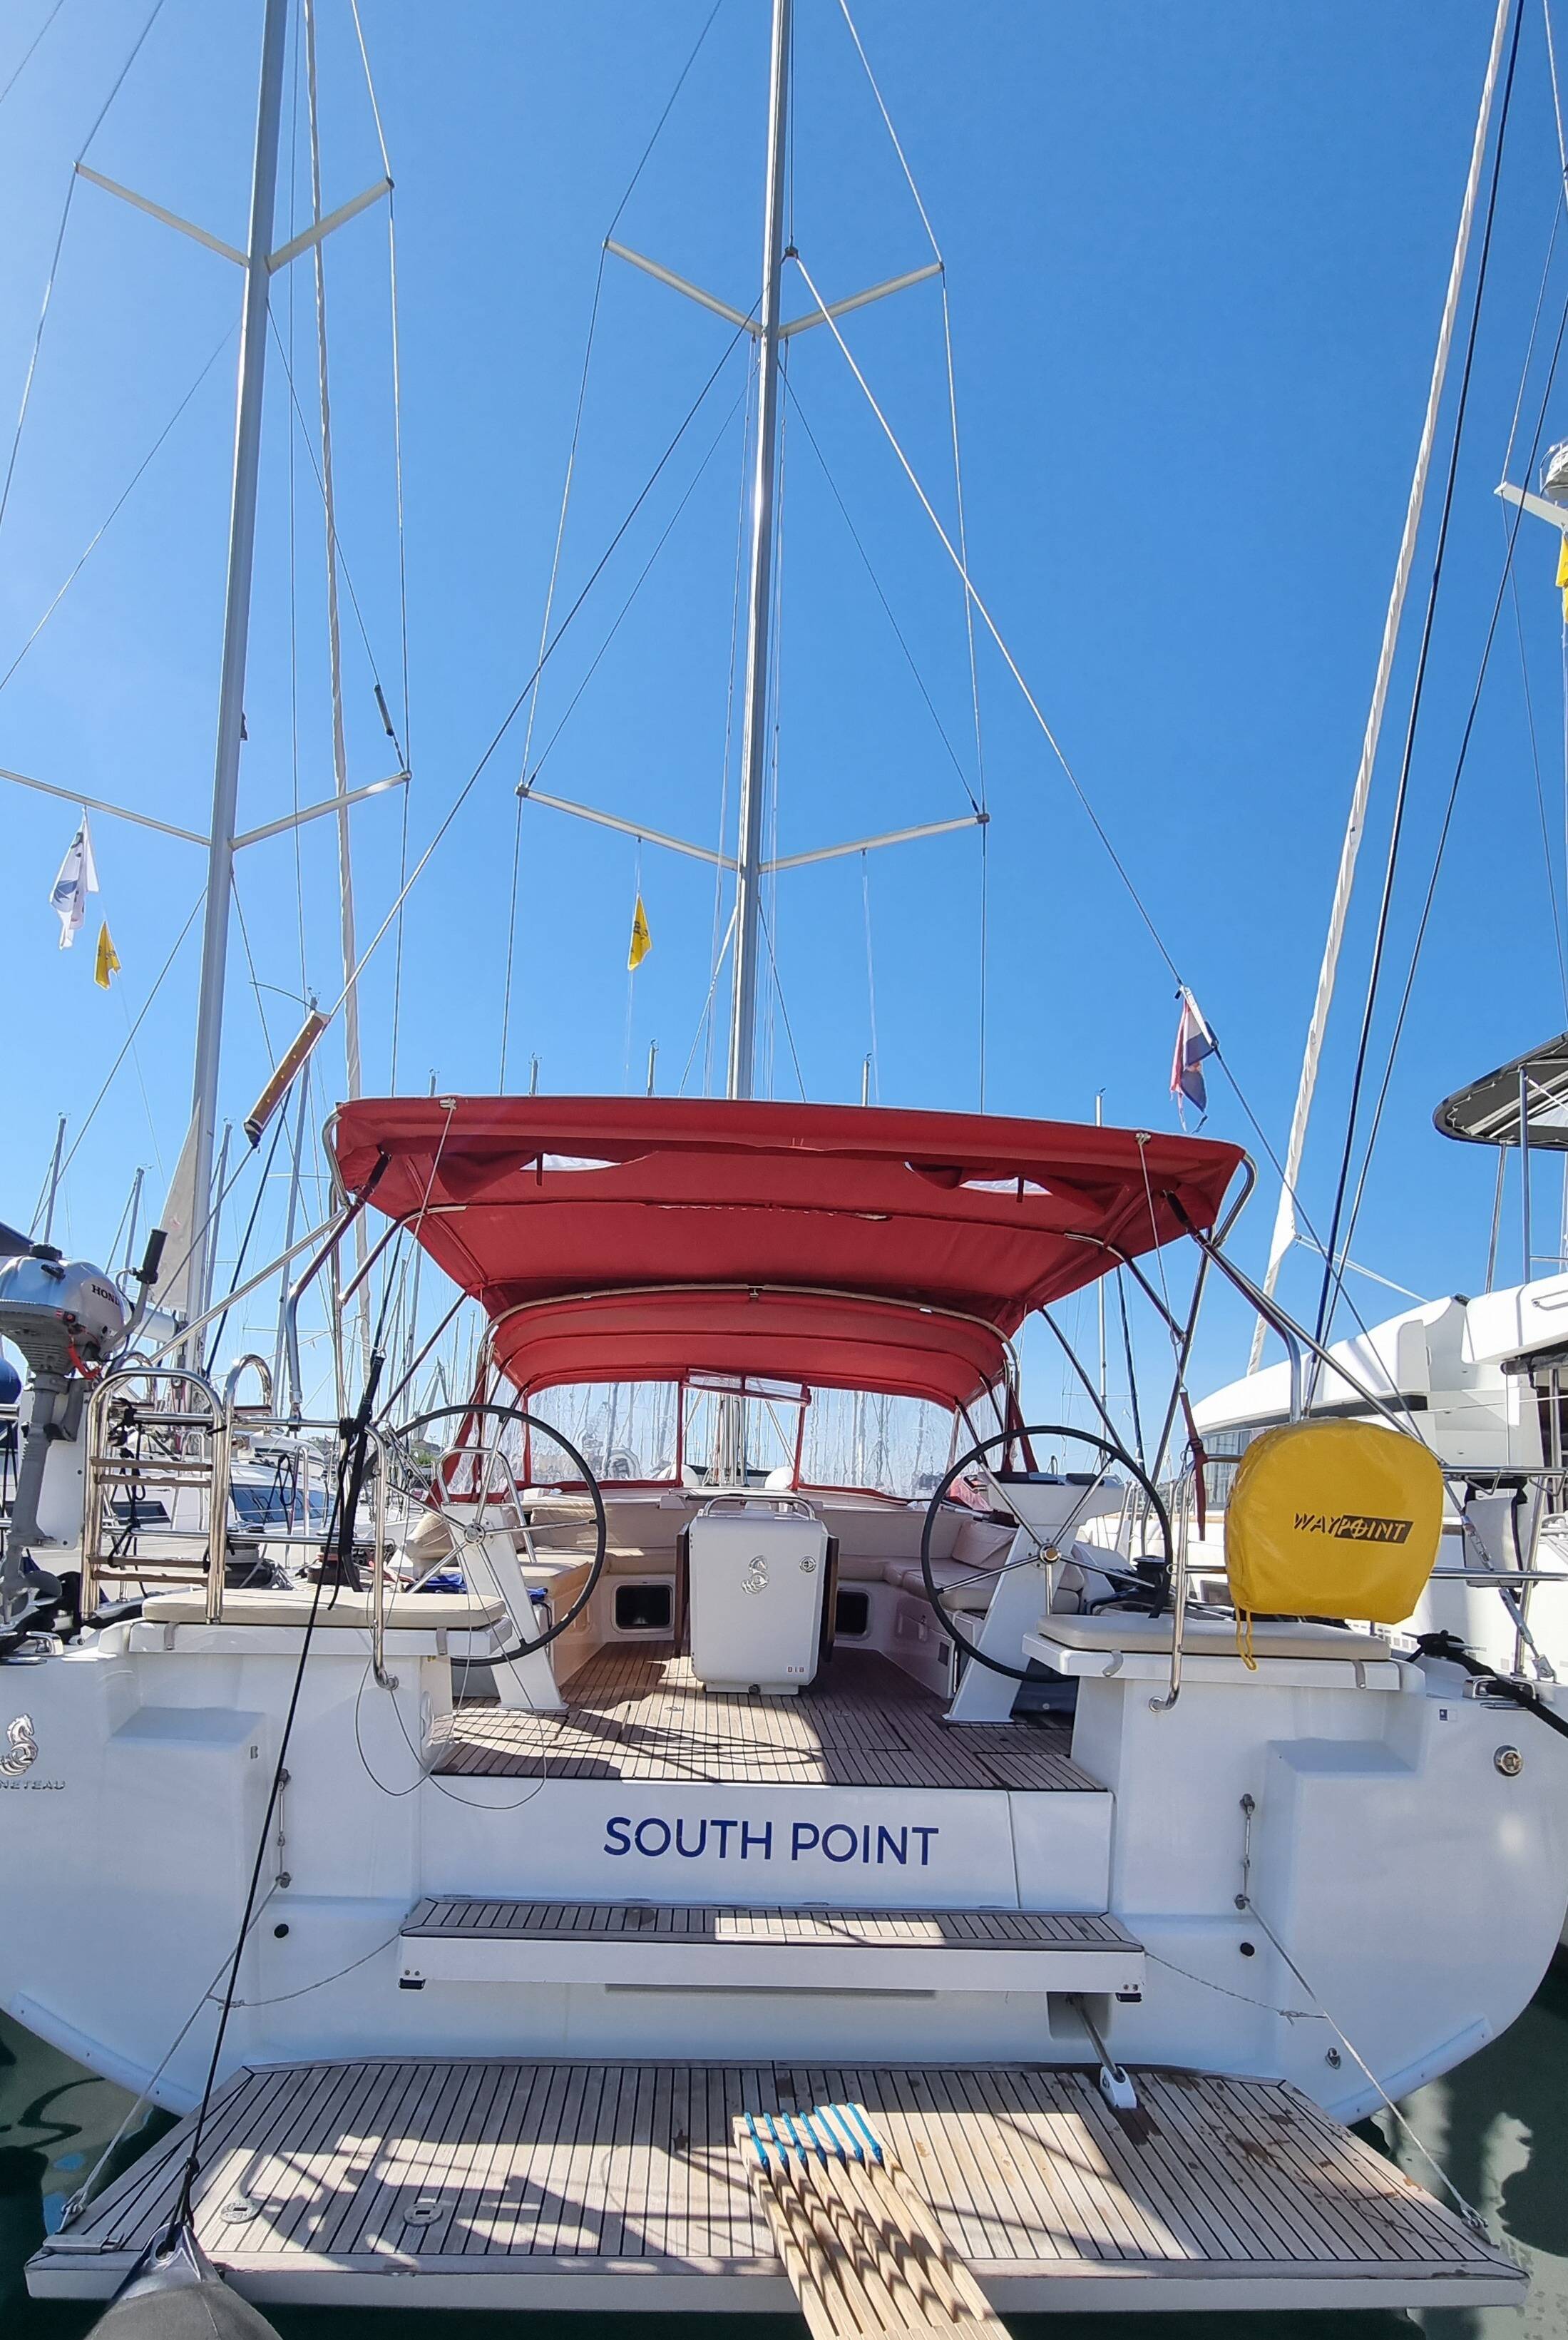 Oceanis 51.1 South Point